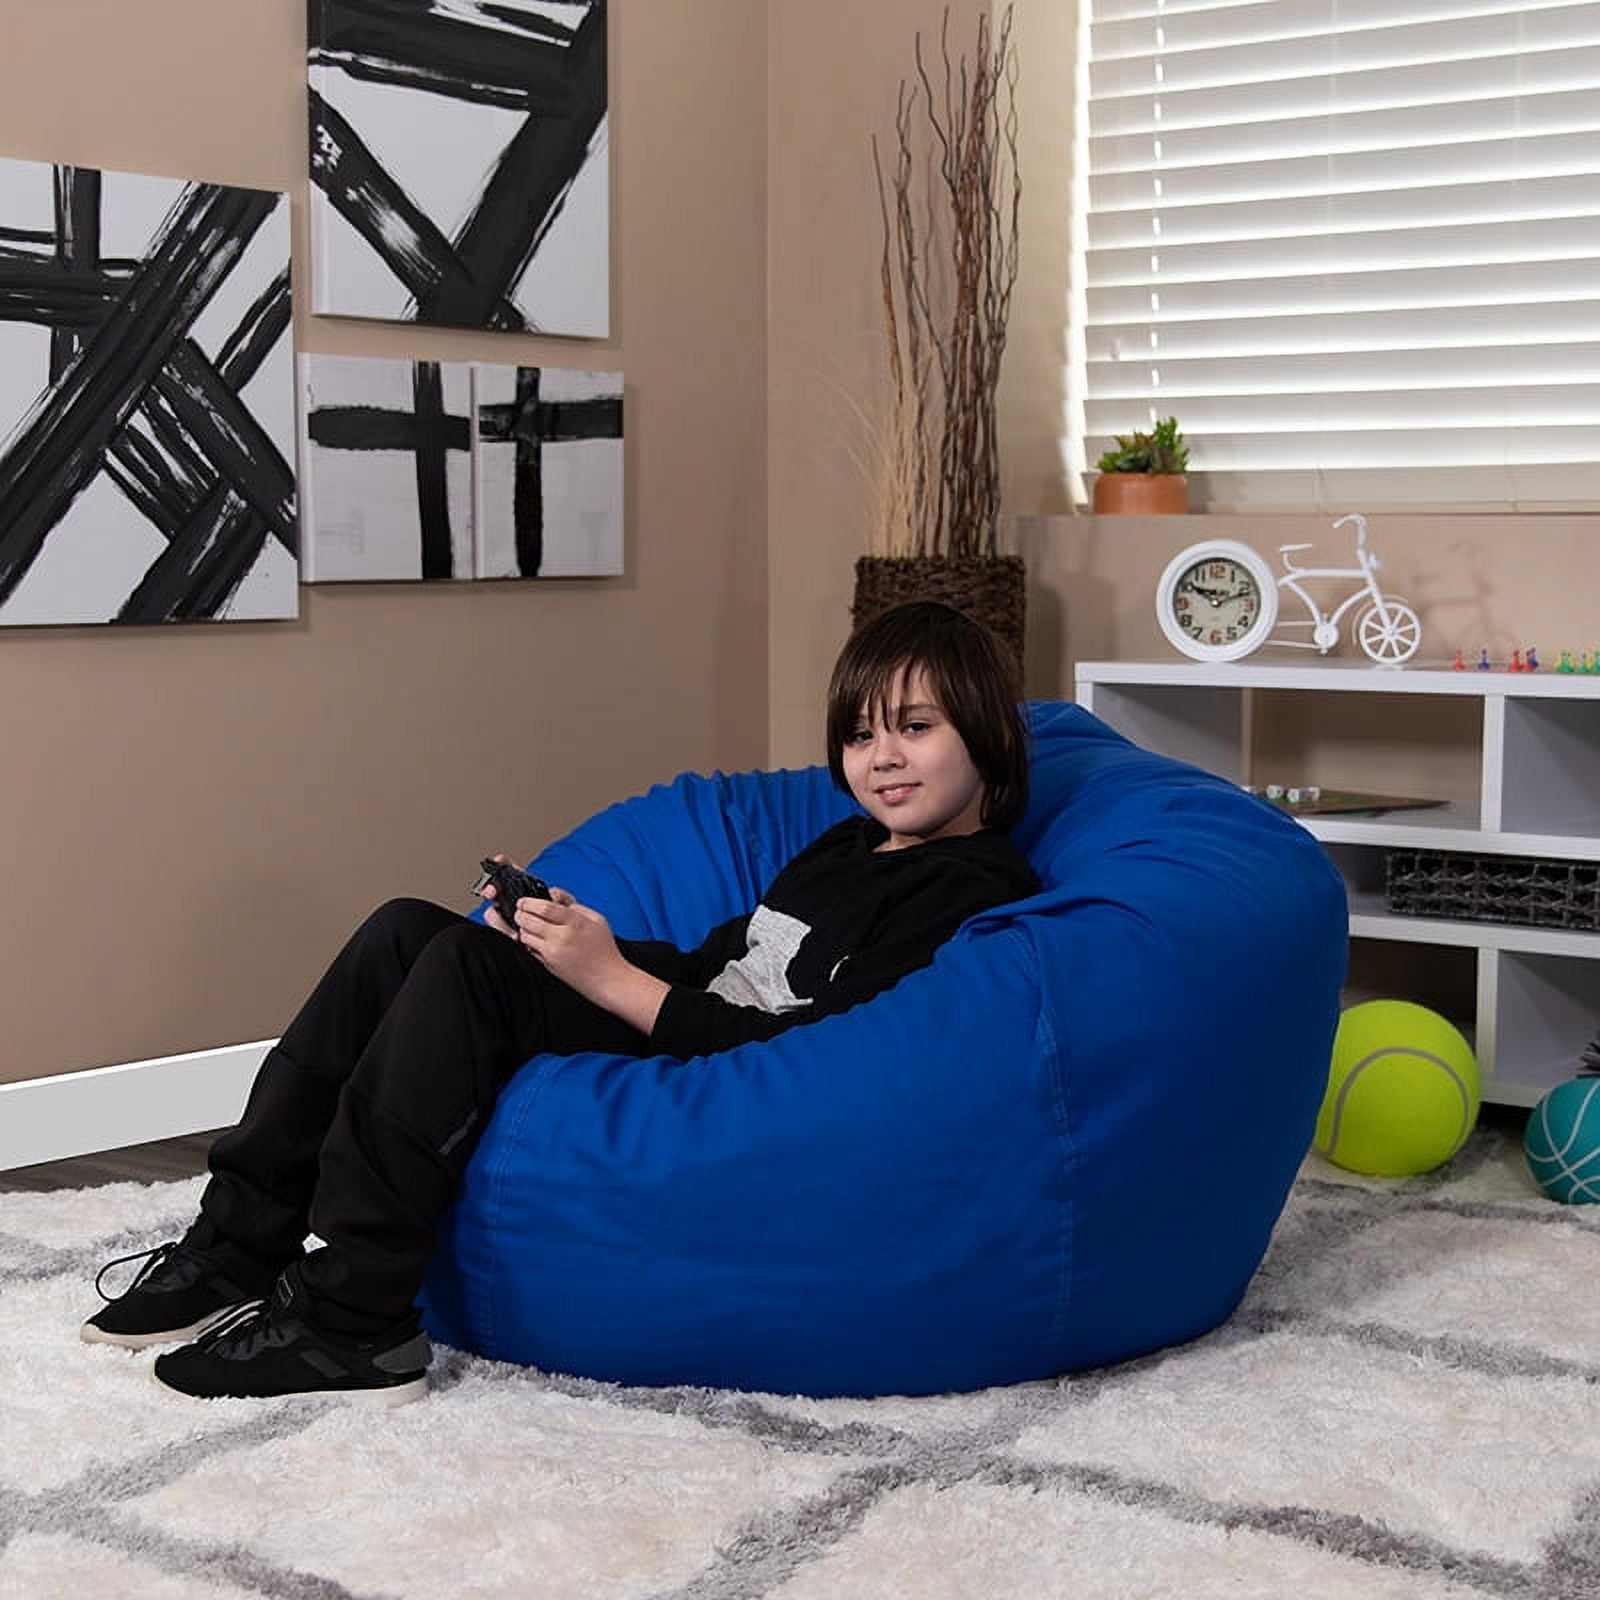 SIMFLAG 3Ft Bean Bag Chair, Memory Foam Filling Bean Bag Chairs with Velvet  Cover, Removable and Machine Washable Cover, Giant Bean Bag Chair for Adult  - Dark Blue : : Home